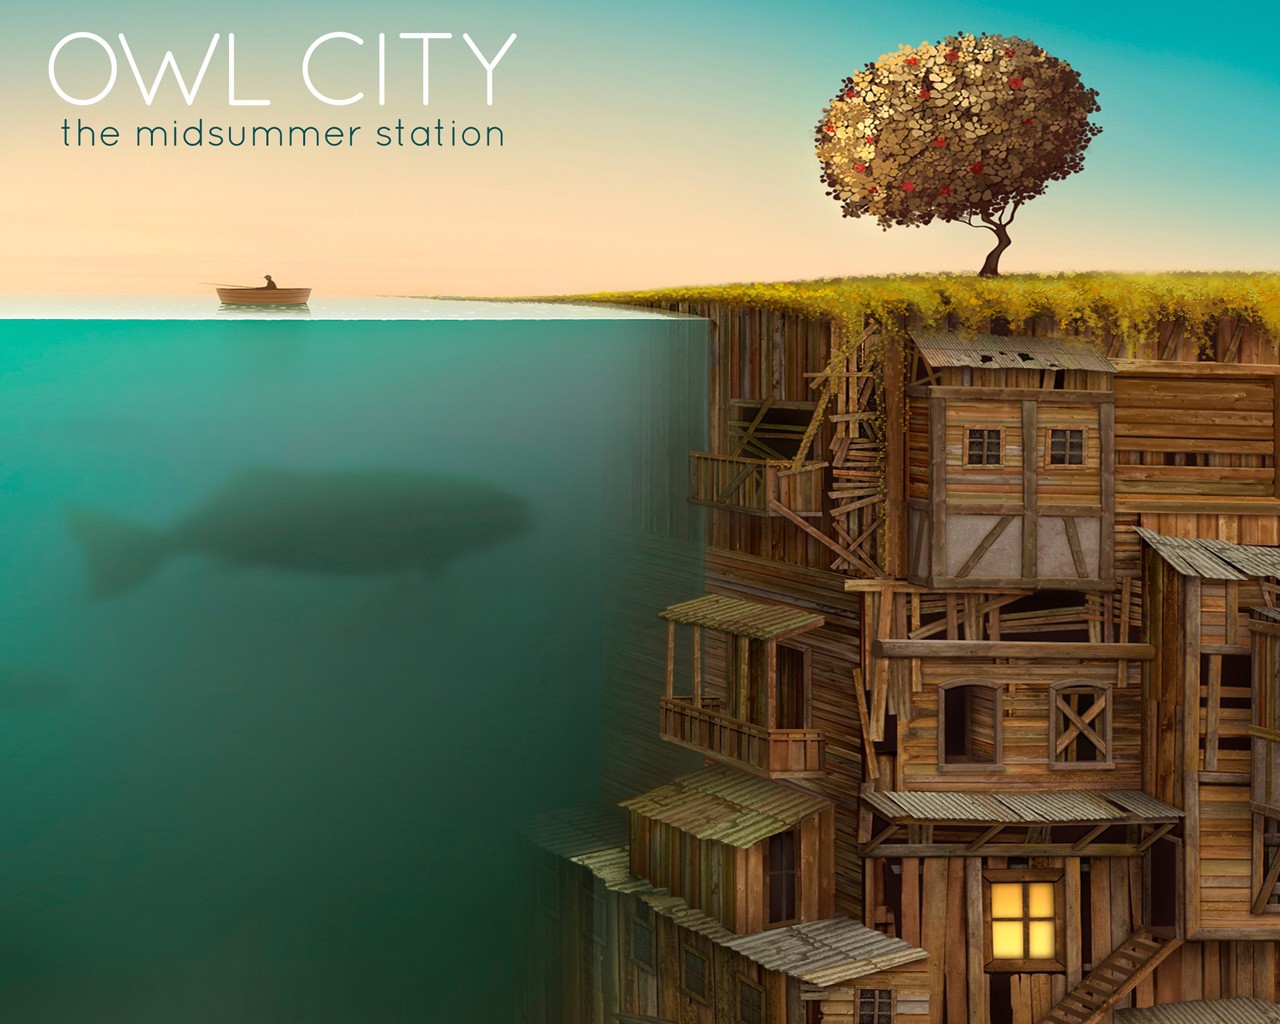 Free Download Owl City Wallpaper 1280x1024 Desktop 1280x1024 For Your Desktop Mobile Tablet Explore 77 Owl City Wallpapers Owl Background Screensavers And Wallpaper Owl Wallpaper Hd Owl Wallpapers For Computers